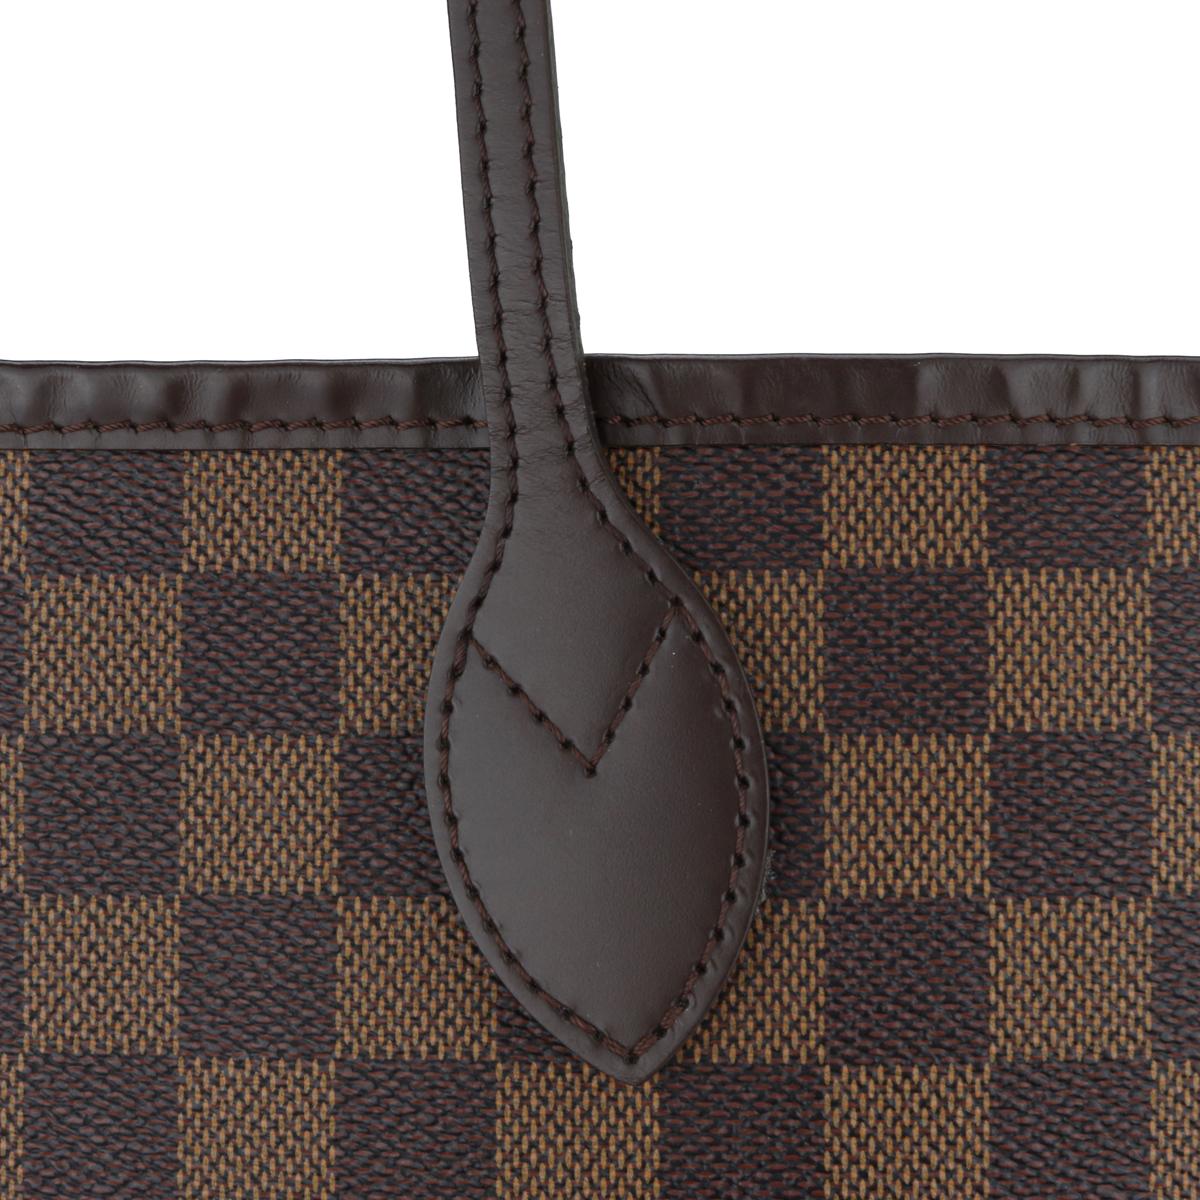 Louis Vuitton Neverfull GM Bag in Damier Ebène with Cherry Red Interior 2015 8